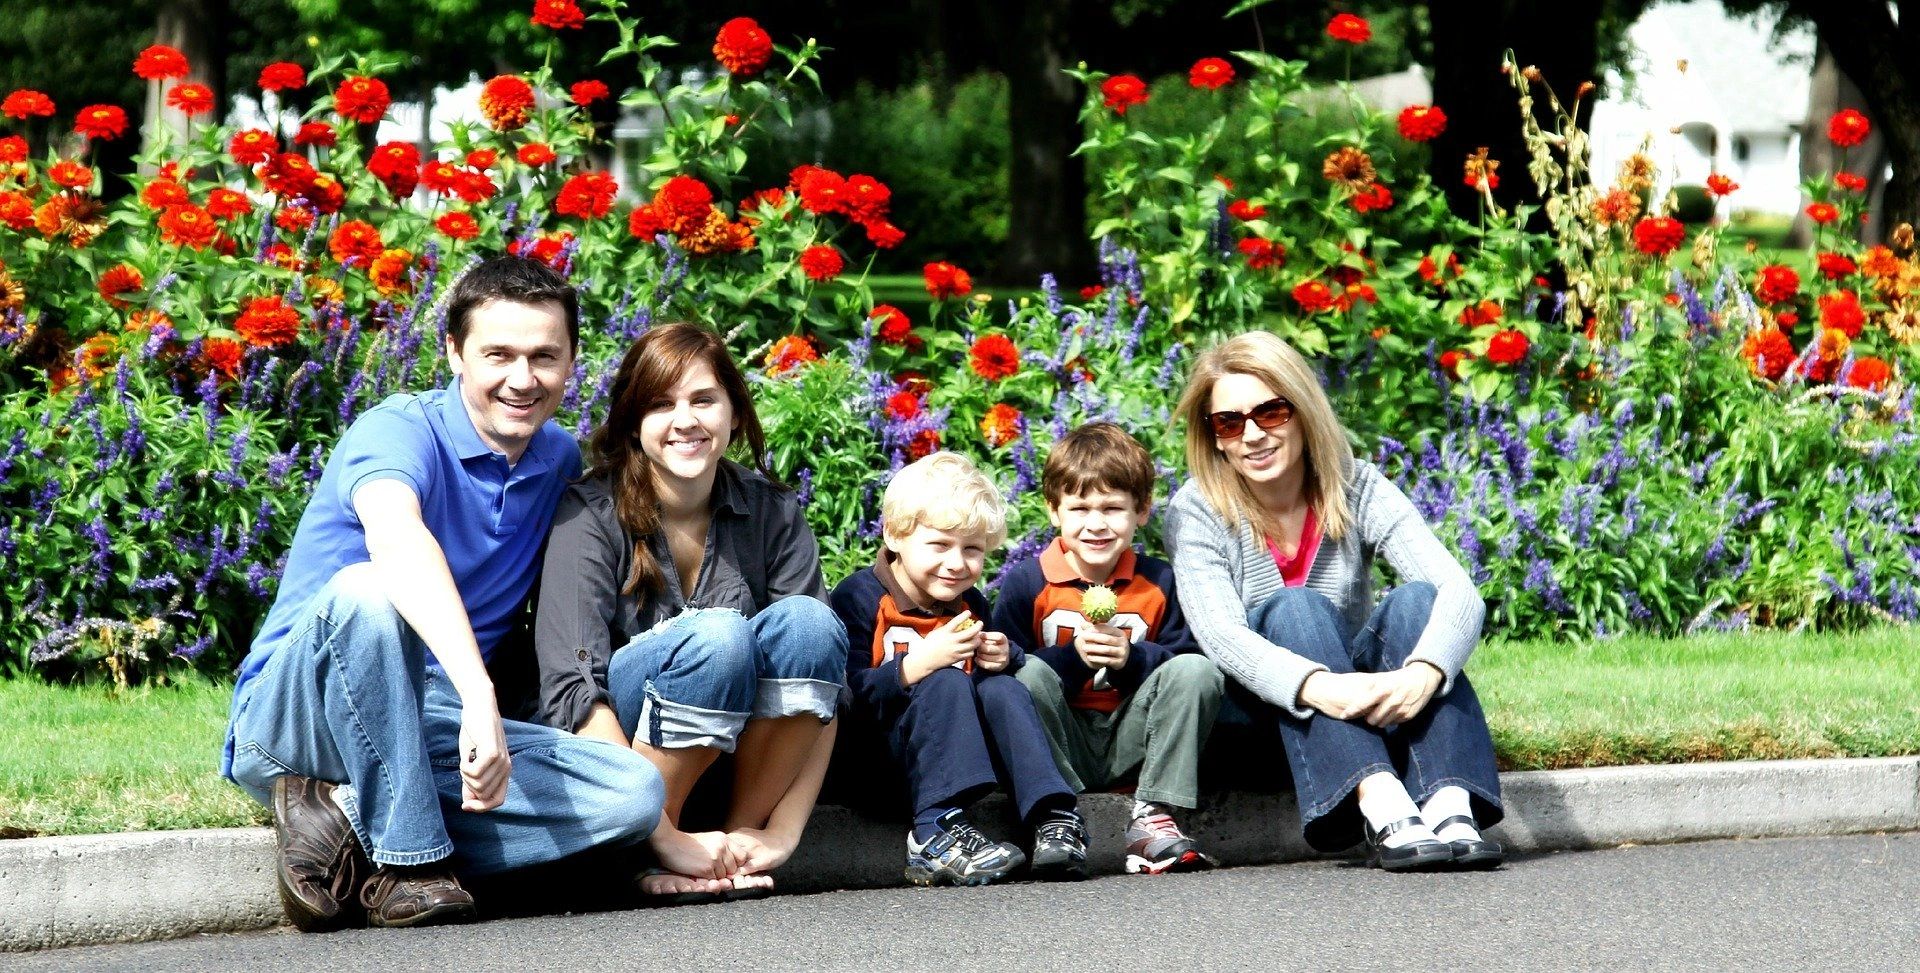 Family of five sitting on a curb in front of red roses and purple flowers.